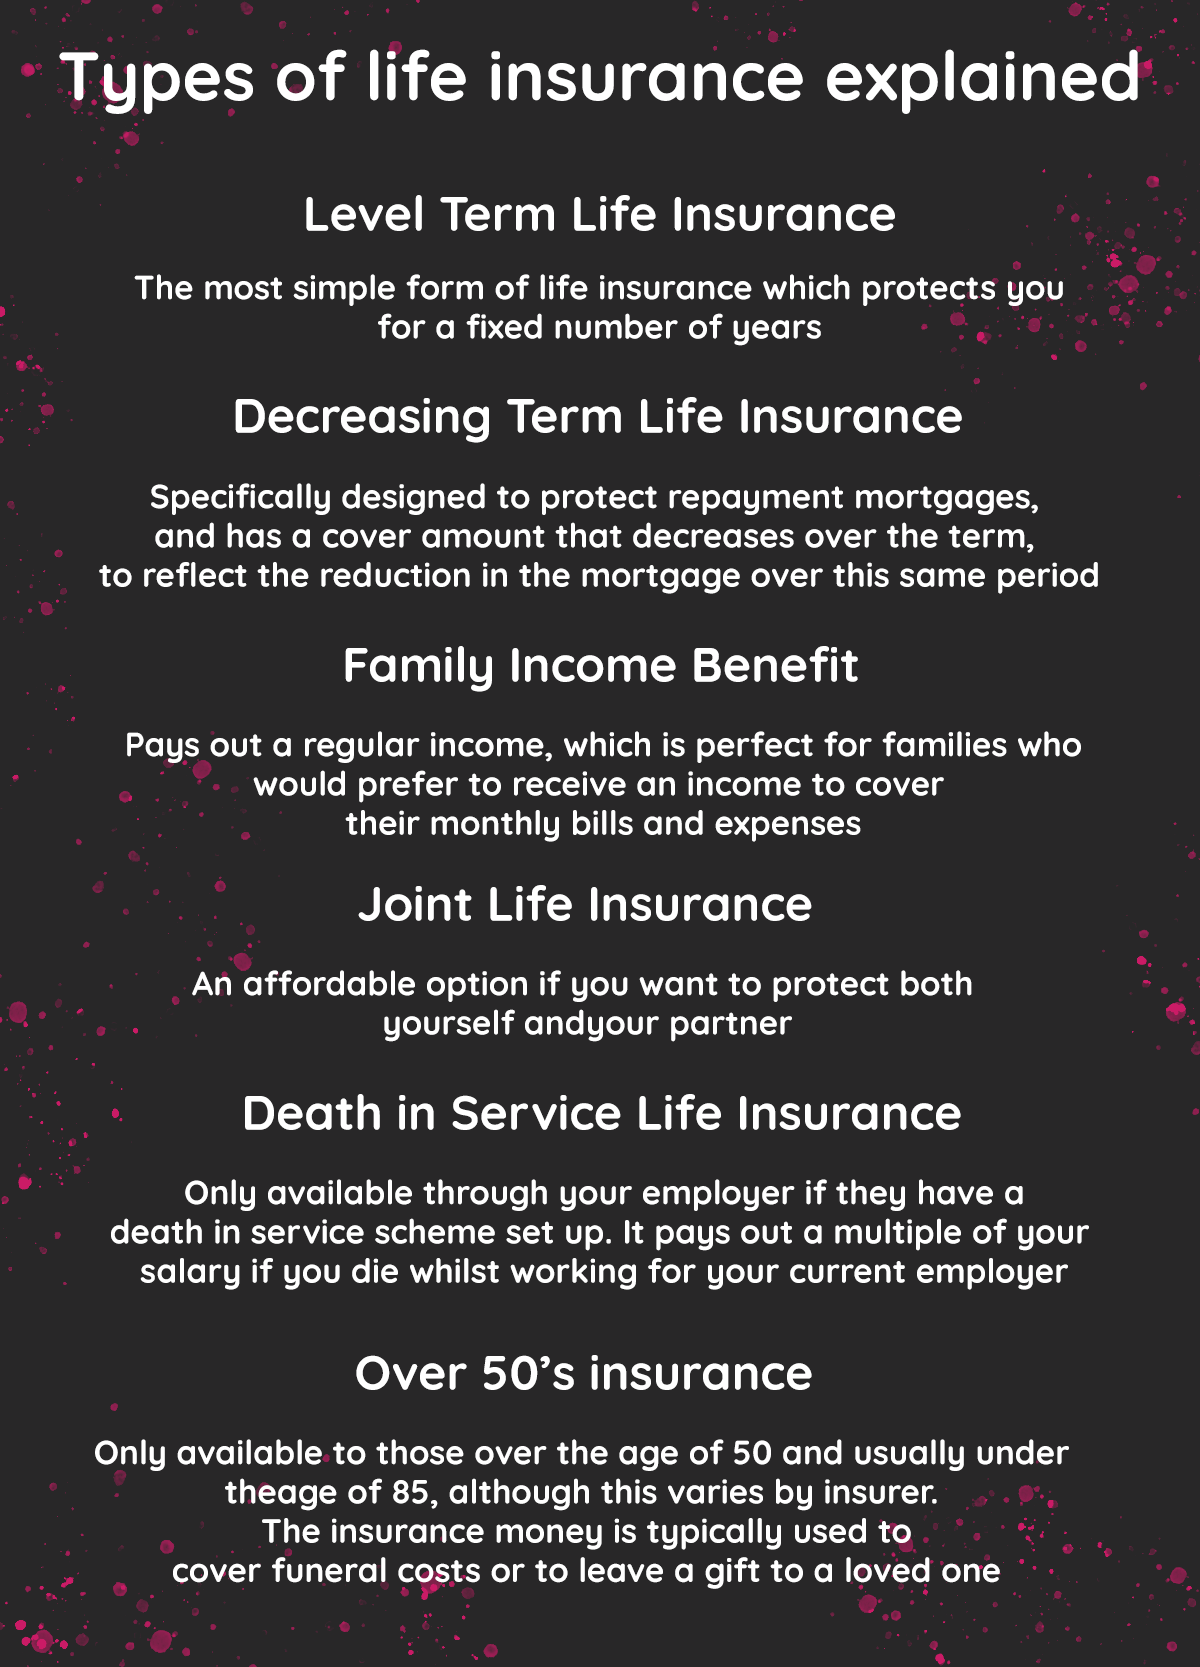 LifeSearch: Types of life insurance explained, such as: Level Term, Decreasing Term, Family Income Benefit